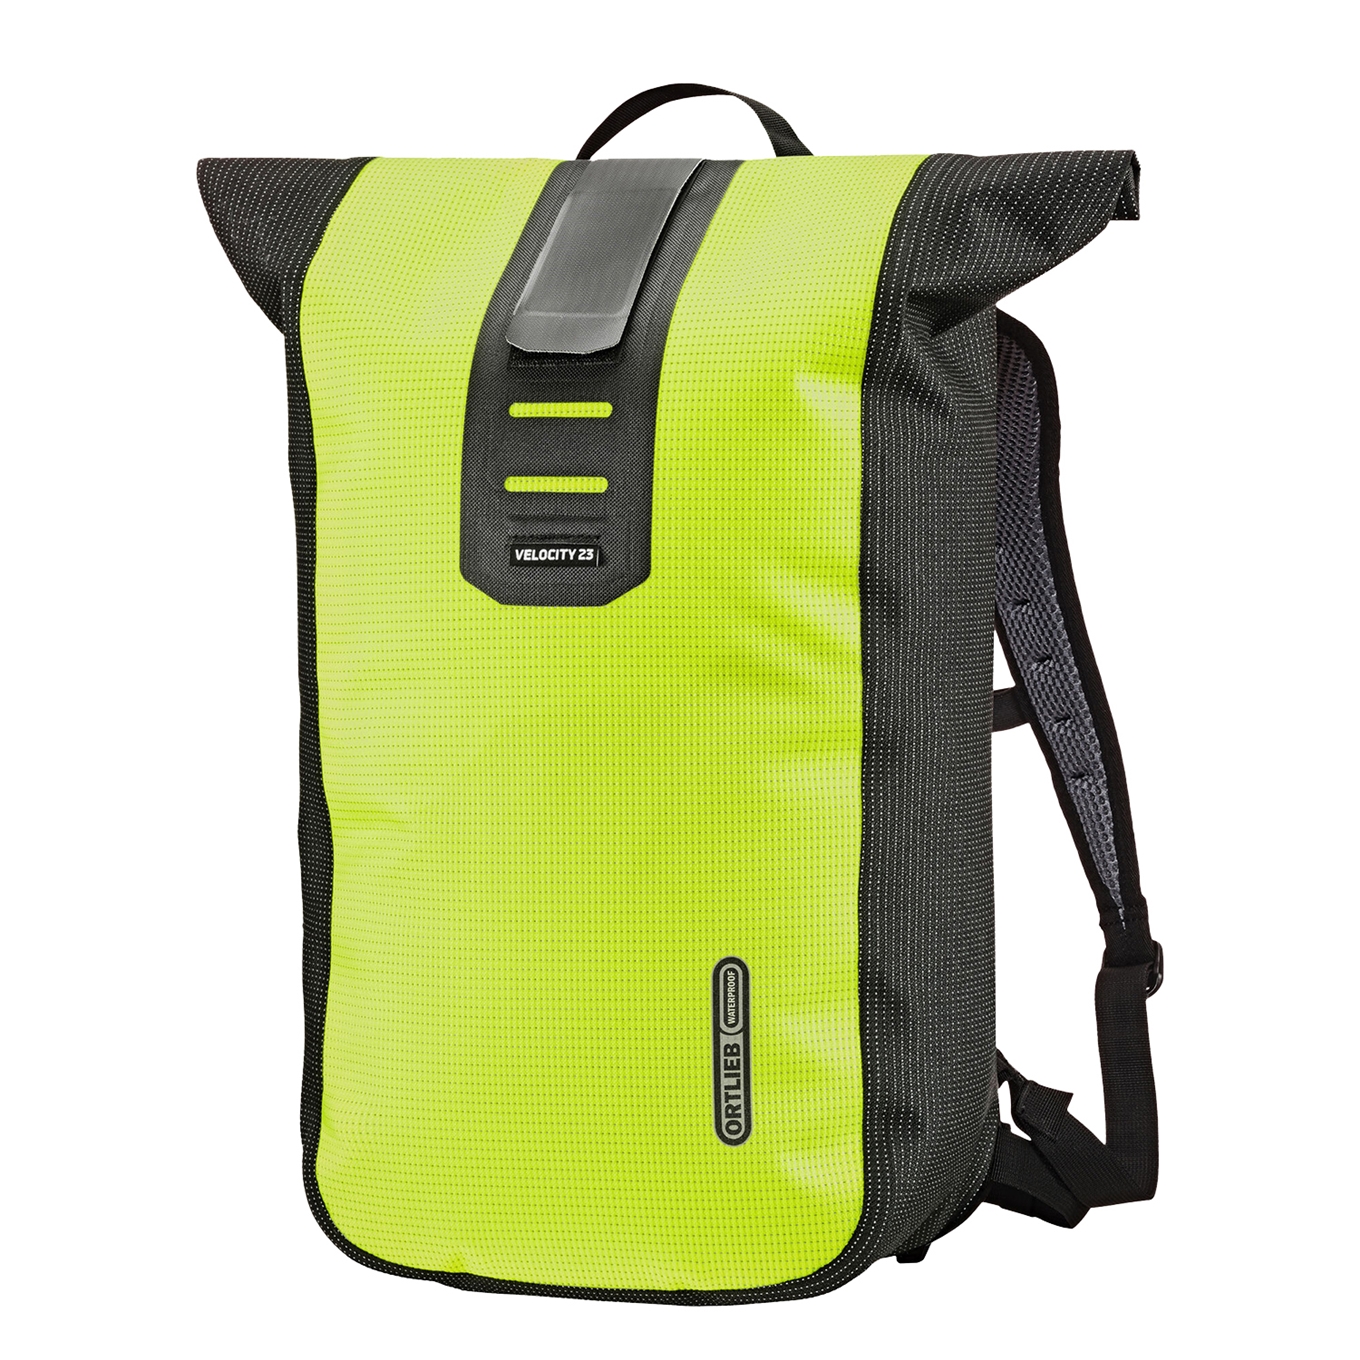 Ortlieb Velocity High Visibility 23 L neon-yellow/black-reflective backpack